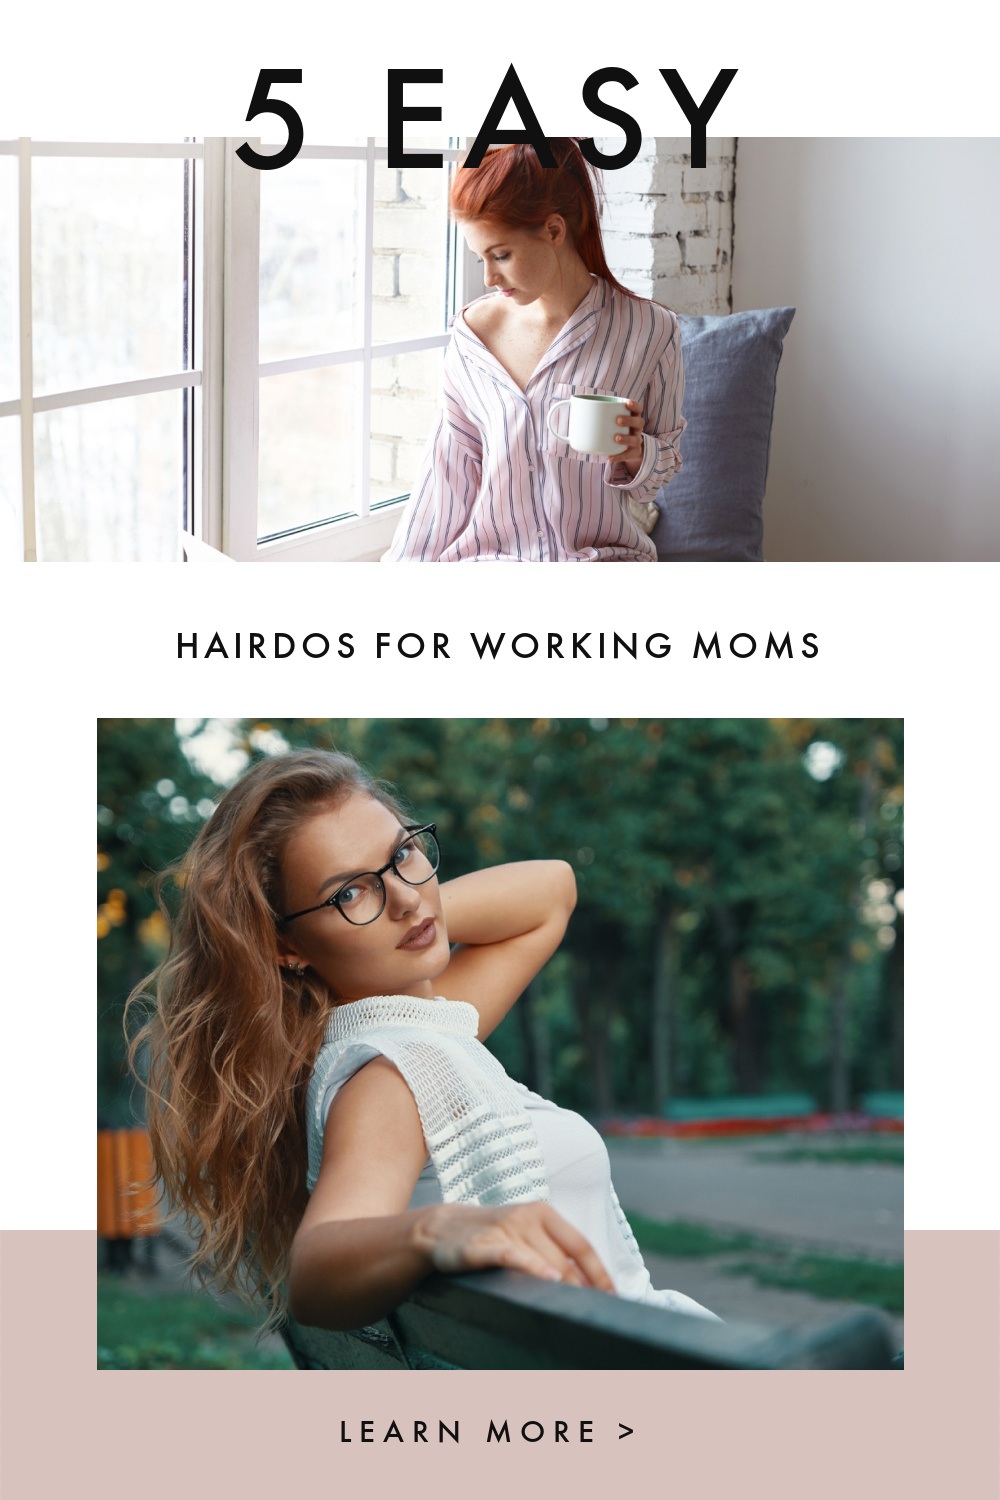 Hairdos for Working Moms